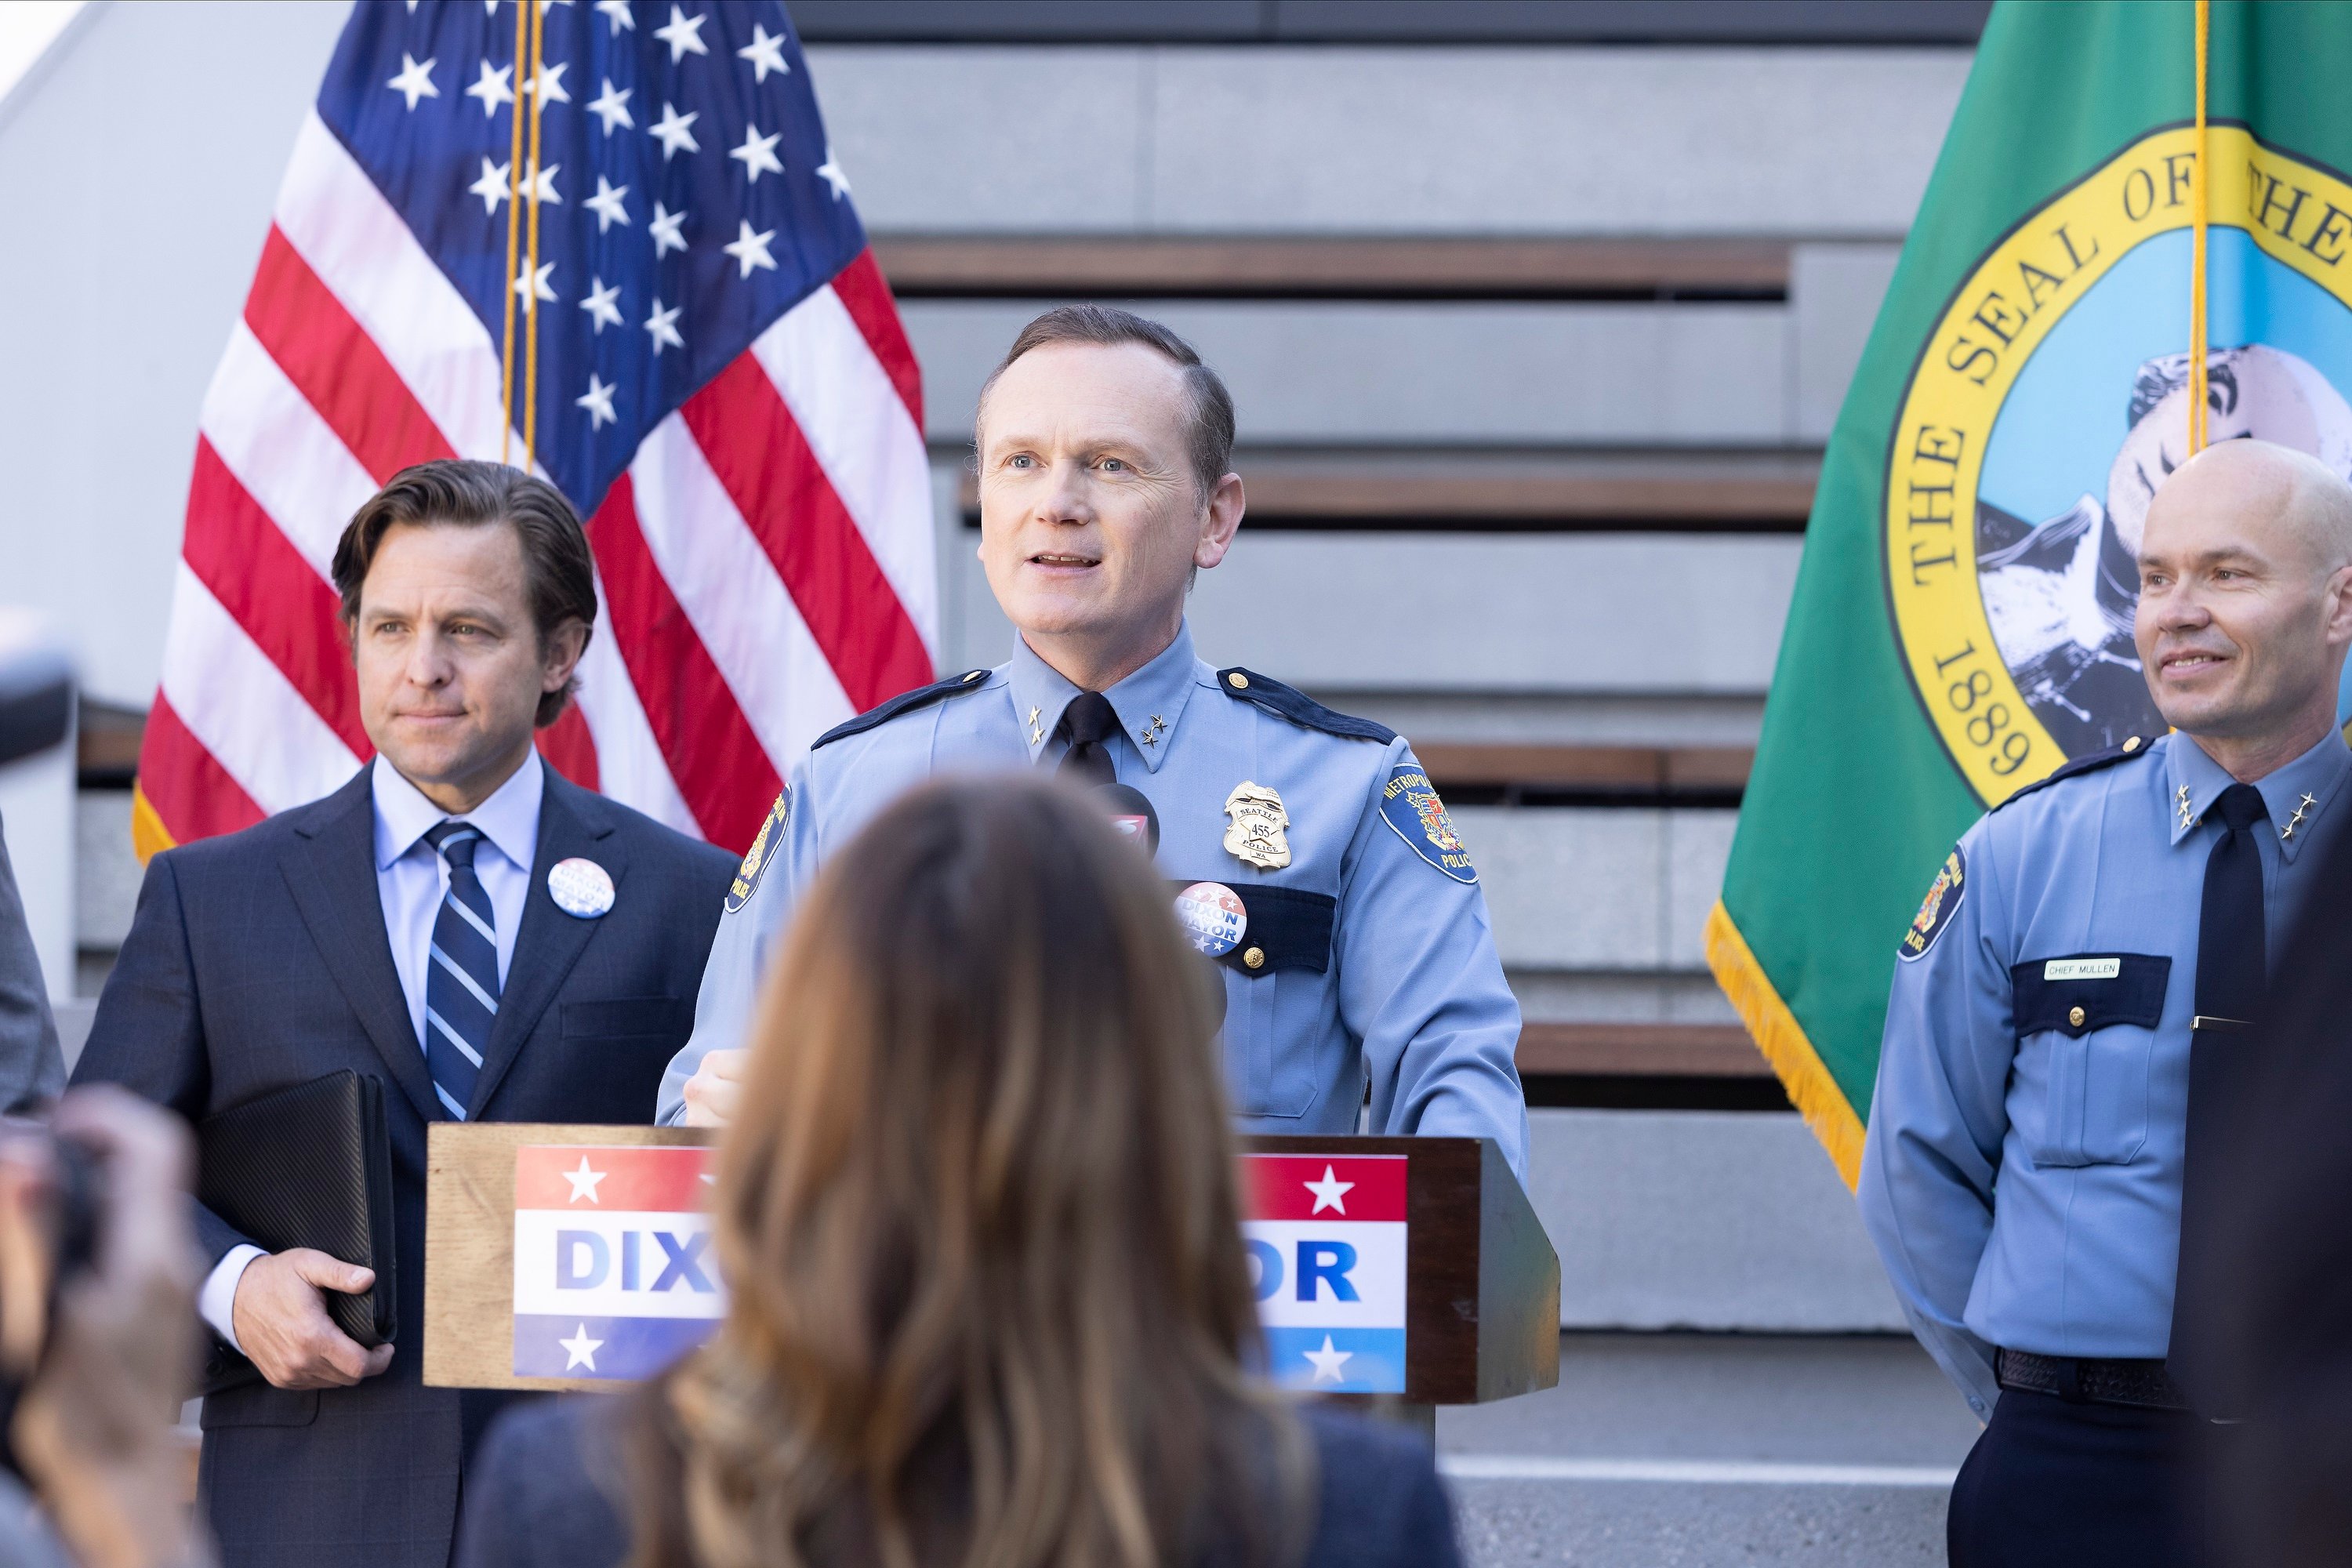 'Station 19' Pat Healy as Michael Dixon giving a speech in front of a podium